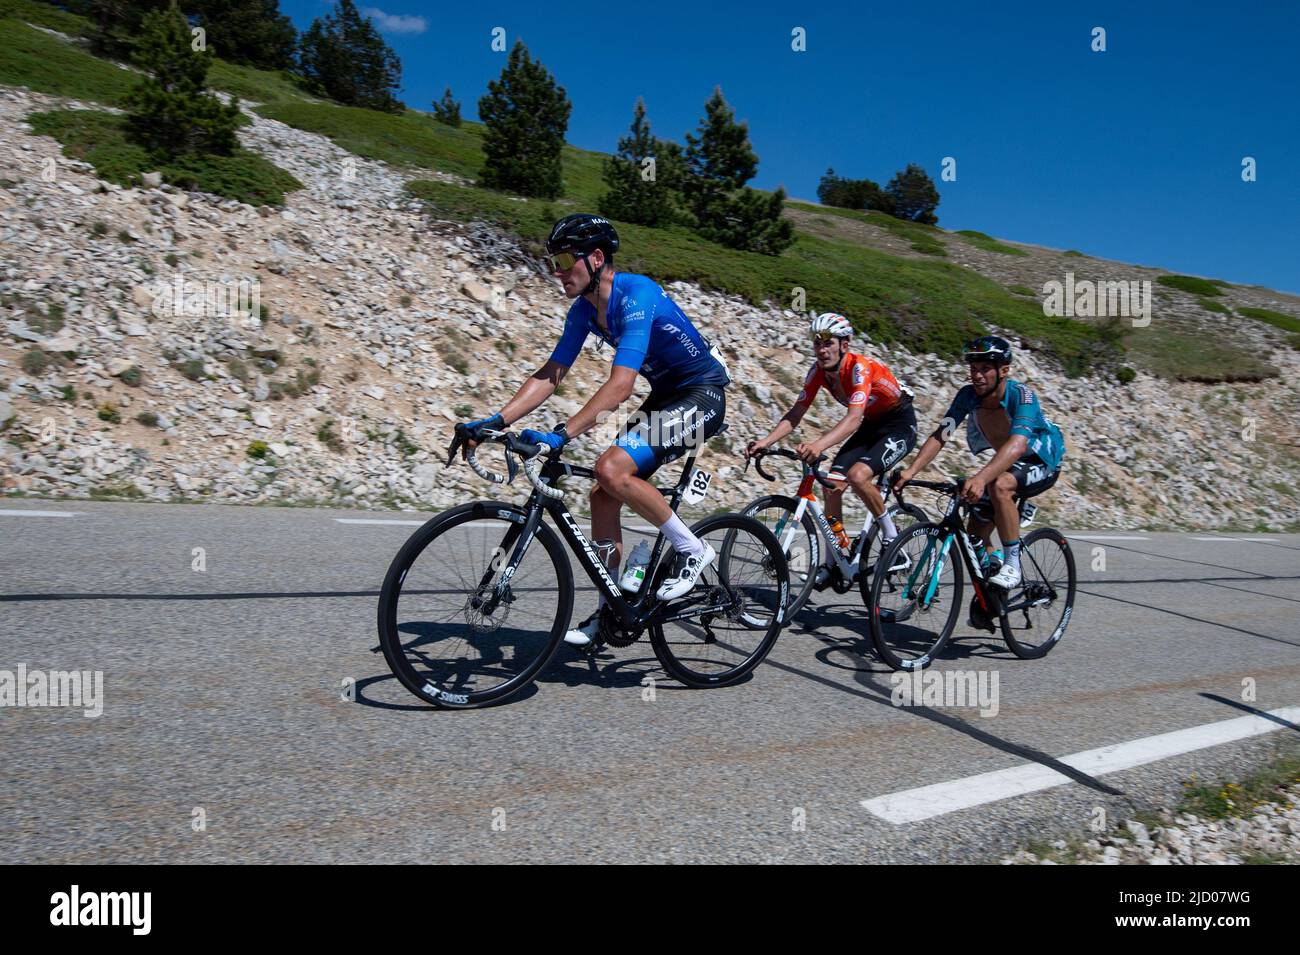 From L to R: Jean Goubert (Nice métropole côte d'azur team), Joris Delbove (st michel - auber93 team) and Thibault Ferasse (b&b hotels - ktm team) seen in action three kilometers from the finish line. The 4th edition of the CIC - Mont Ventoux Dénivelé Challenges is part of the UCI Europe Tour 2022 calendar in category 1.1. Starting from Vaison la Romaine, the distance to be covered is 154 kilometers of race with a double ascent of Mont Ventoux with a summit finish. Ruben Guerreiro (EF-Education EasyPost) won the Mont Ventoux Dénivelé Challenges solo ahead of teammate Esteban Chaves (EF-Educat Stock Photo